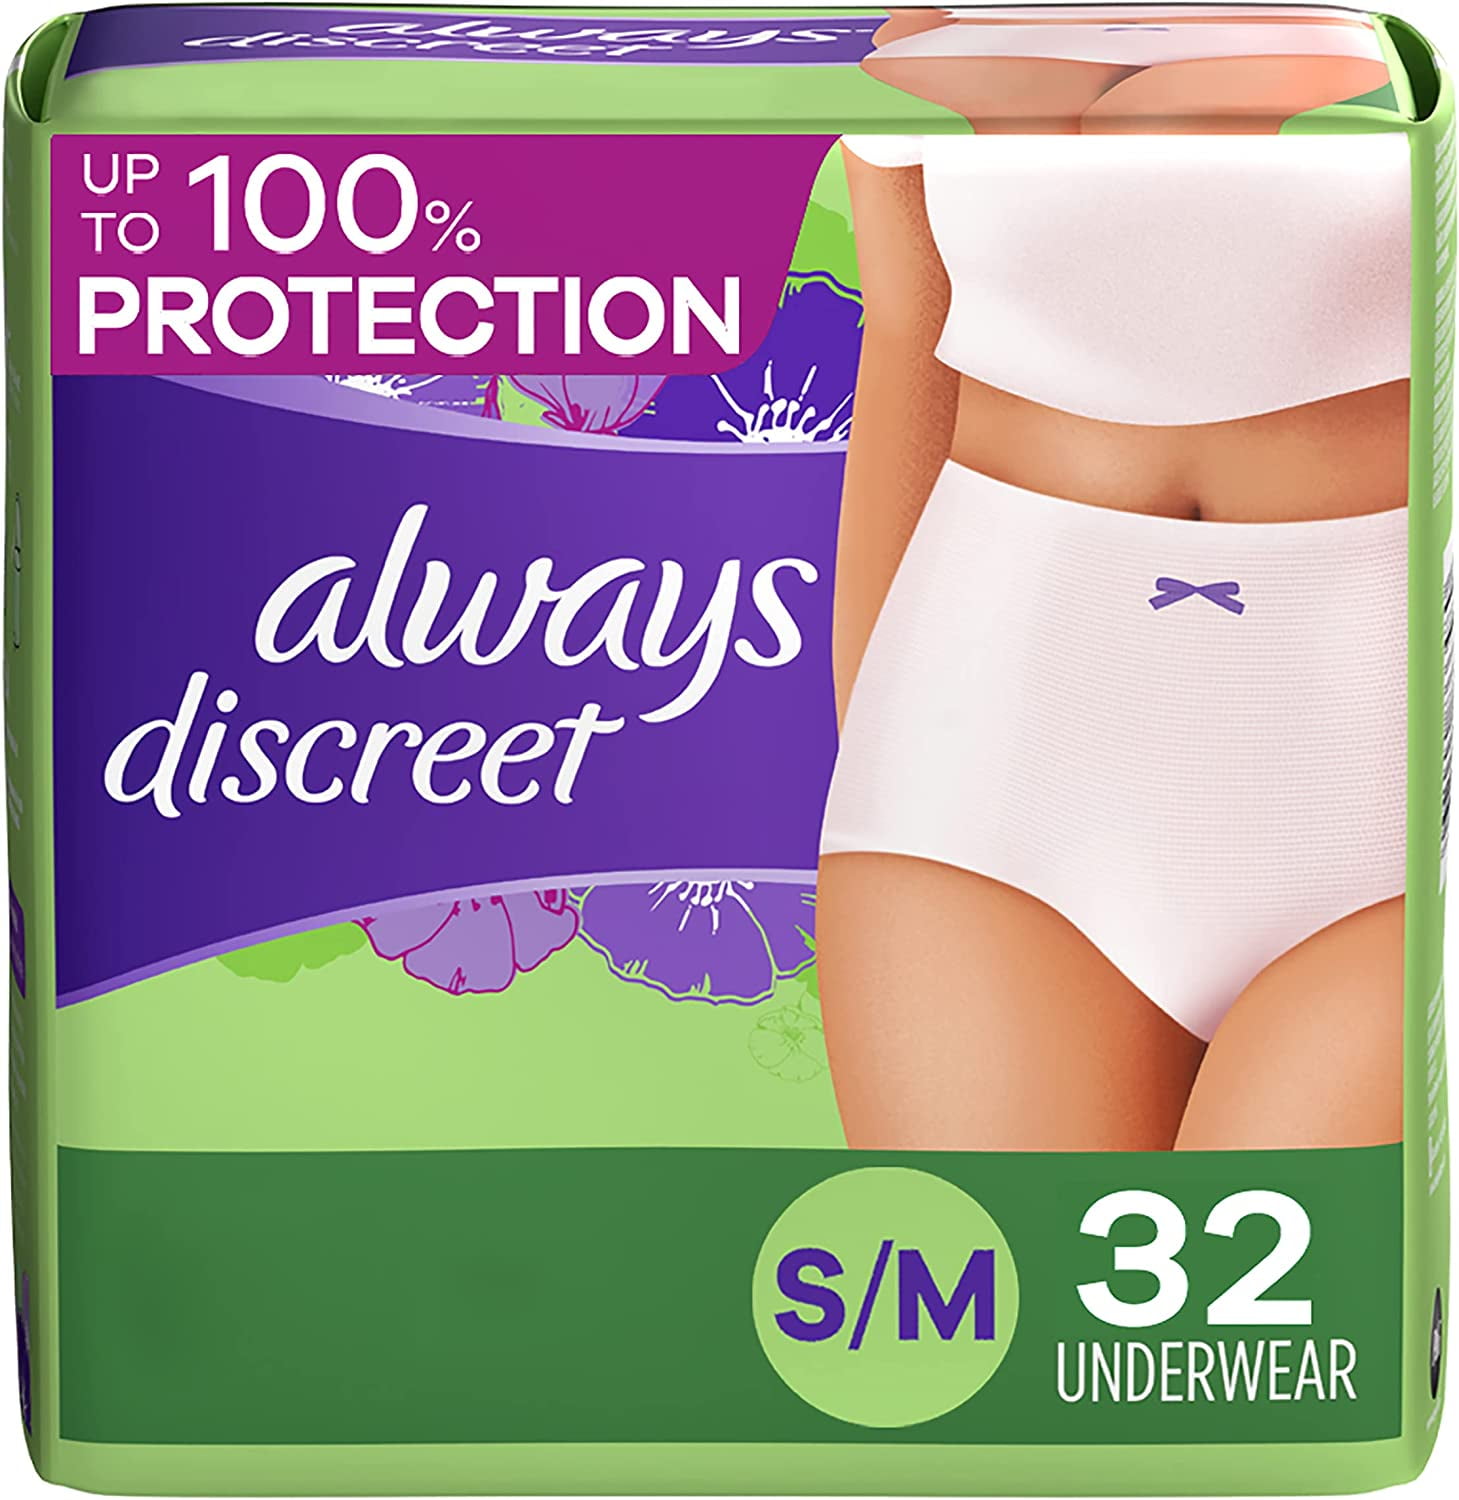 Depend Adult Incontinence/Postpartum Underwear for Women, Max Absorbency M  (22 ct) Pink